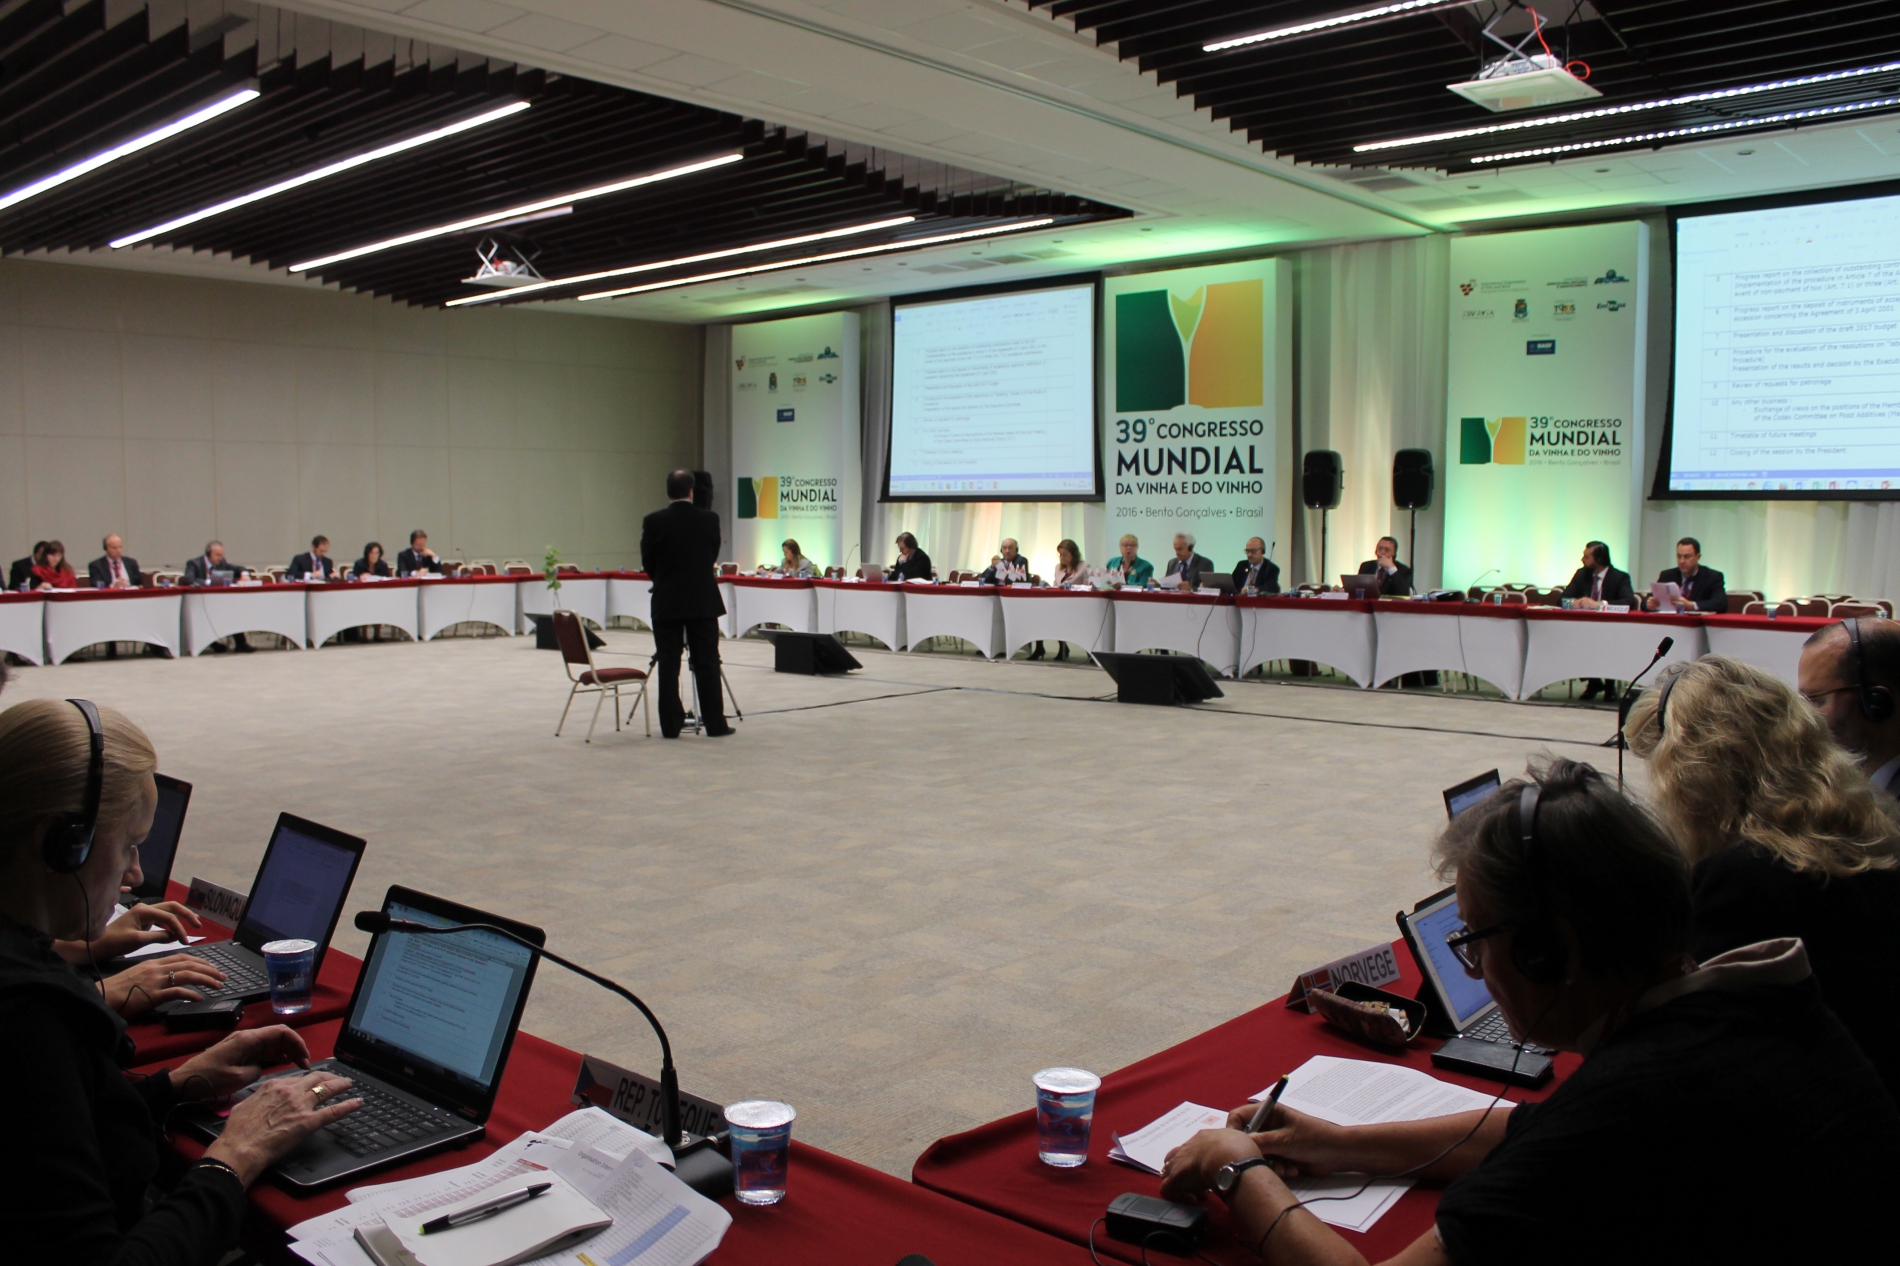 Summary of resolutions adopted in 2016 by the 14th OIV General Assembly